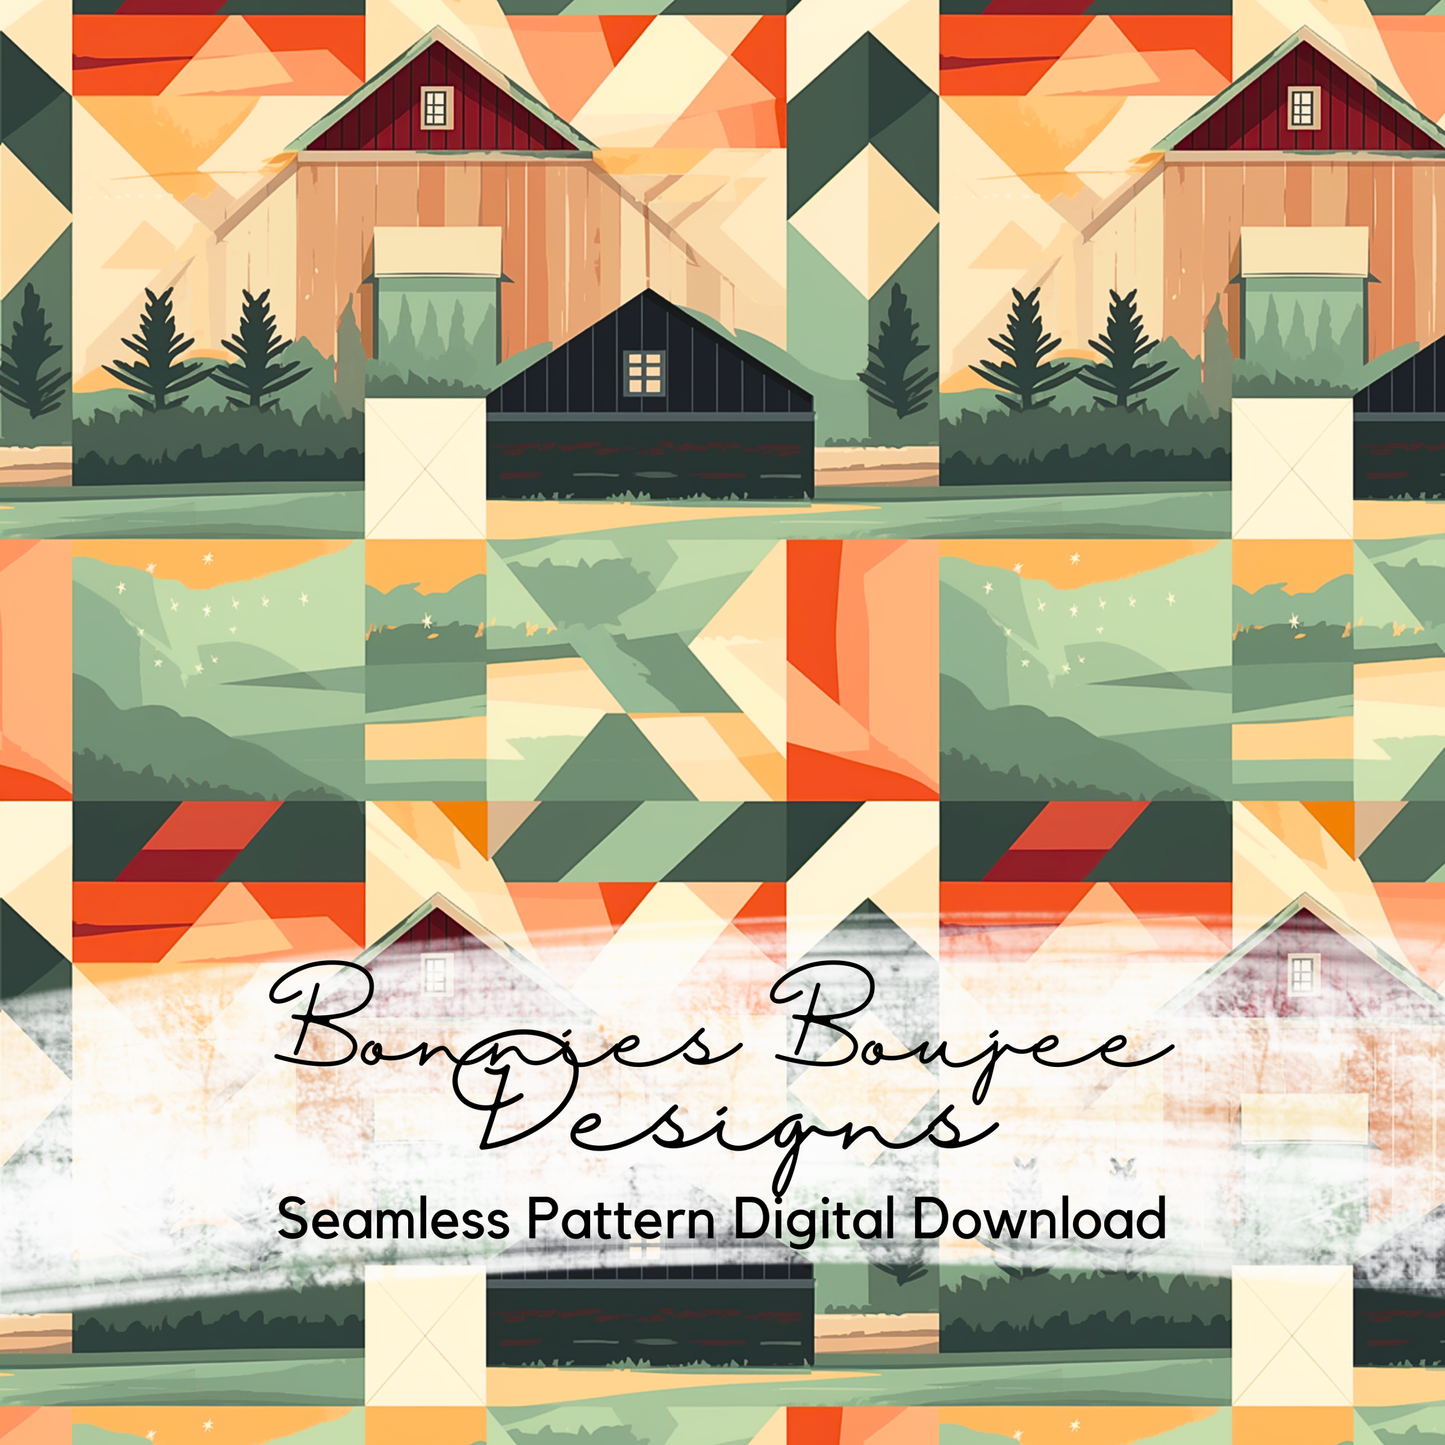 Distressed Barn Quilt Stylized Seamless File